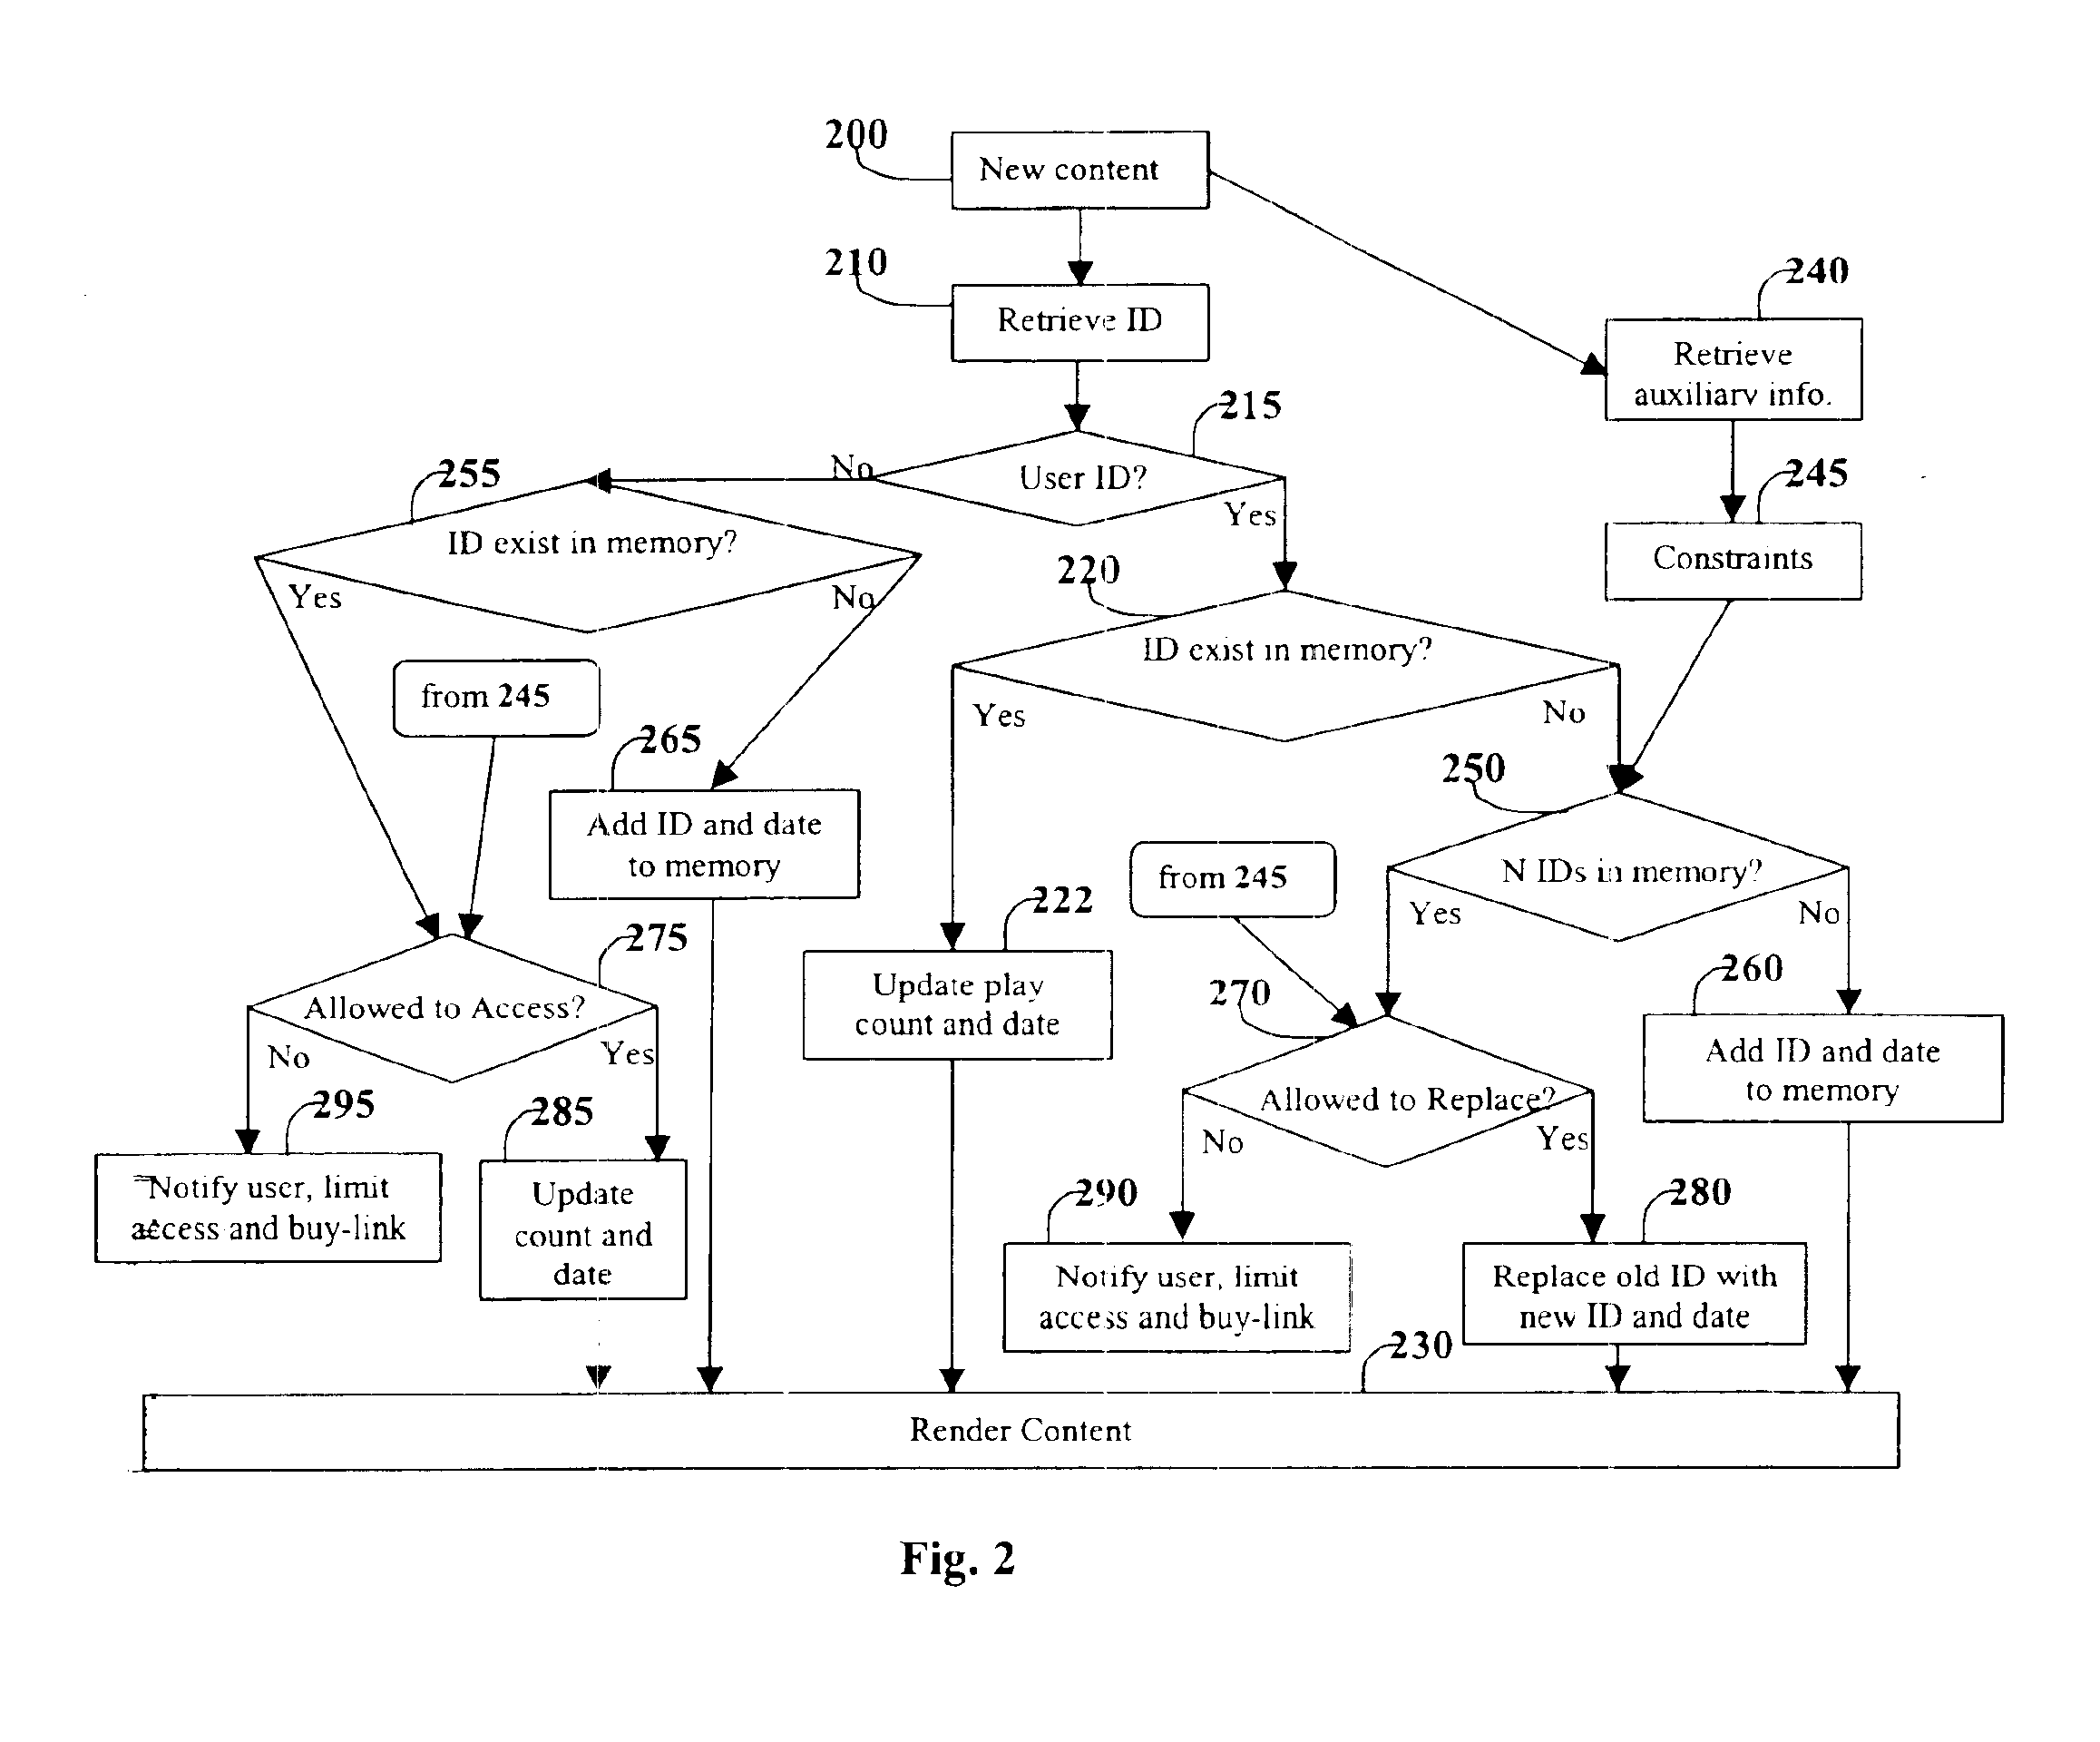 Method and apparatus for automatic ID management